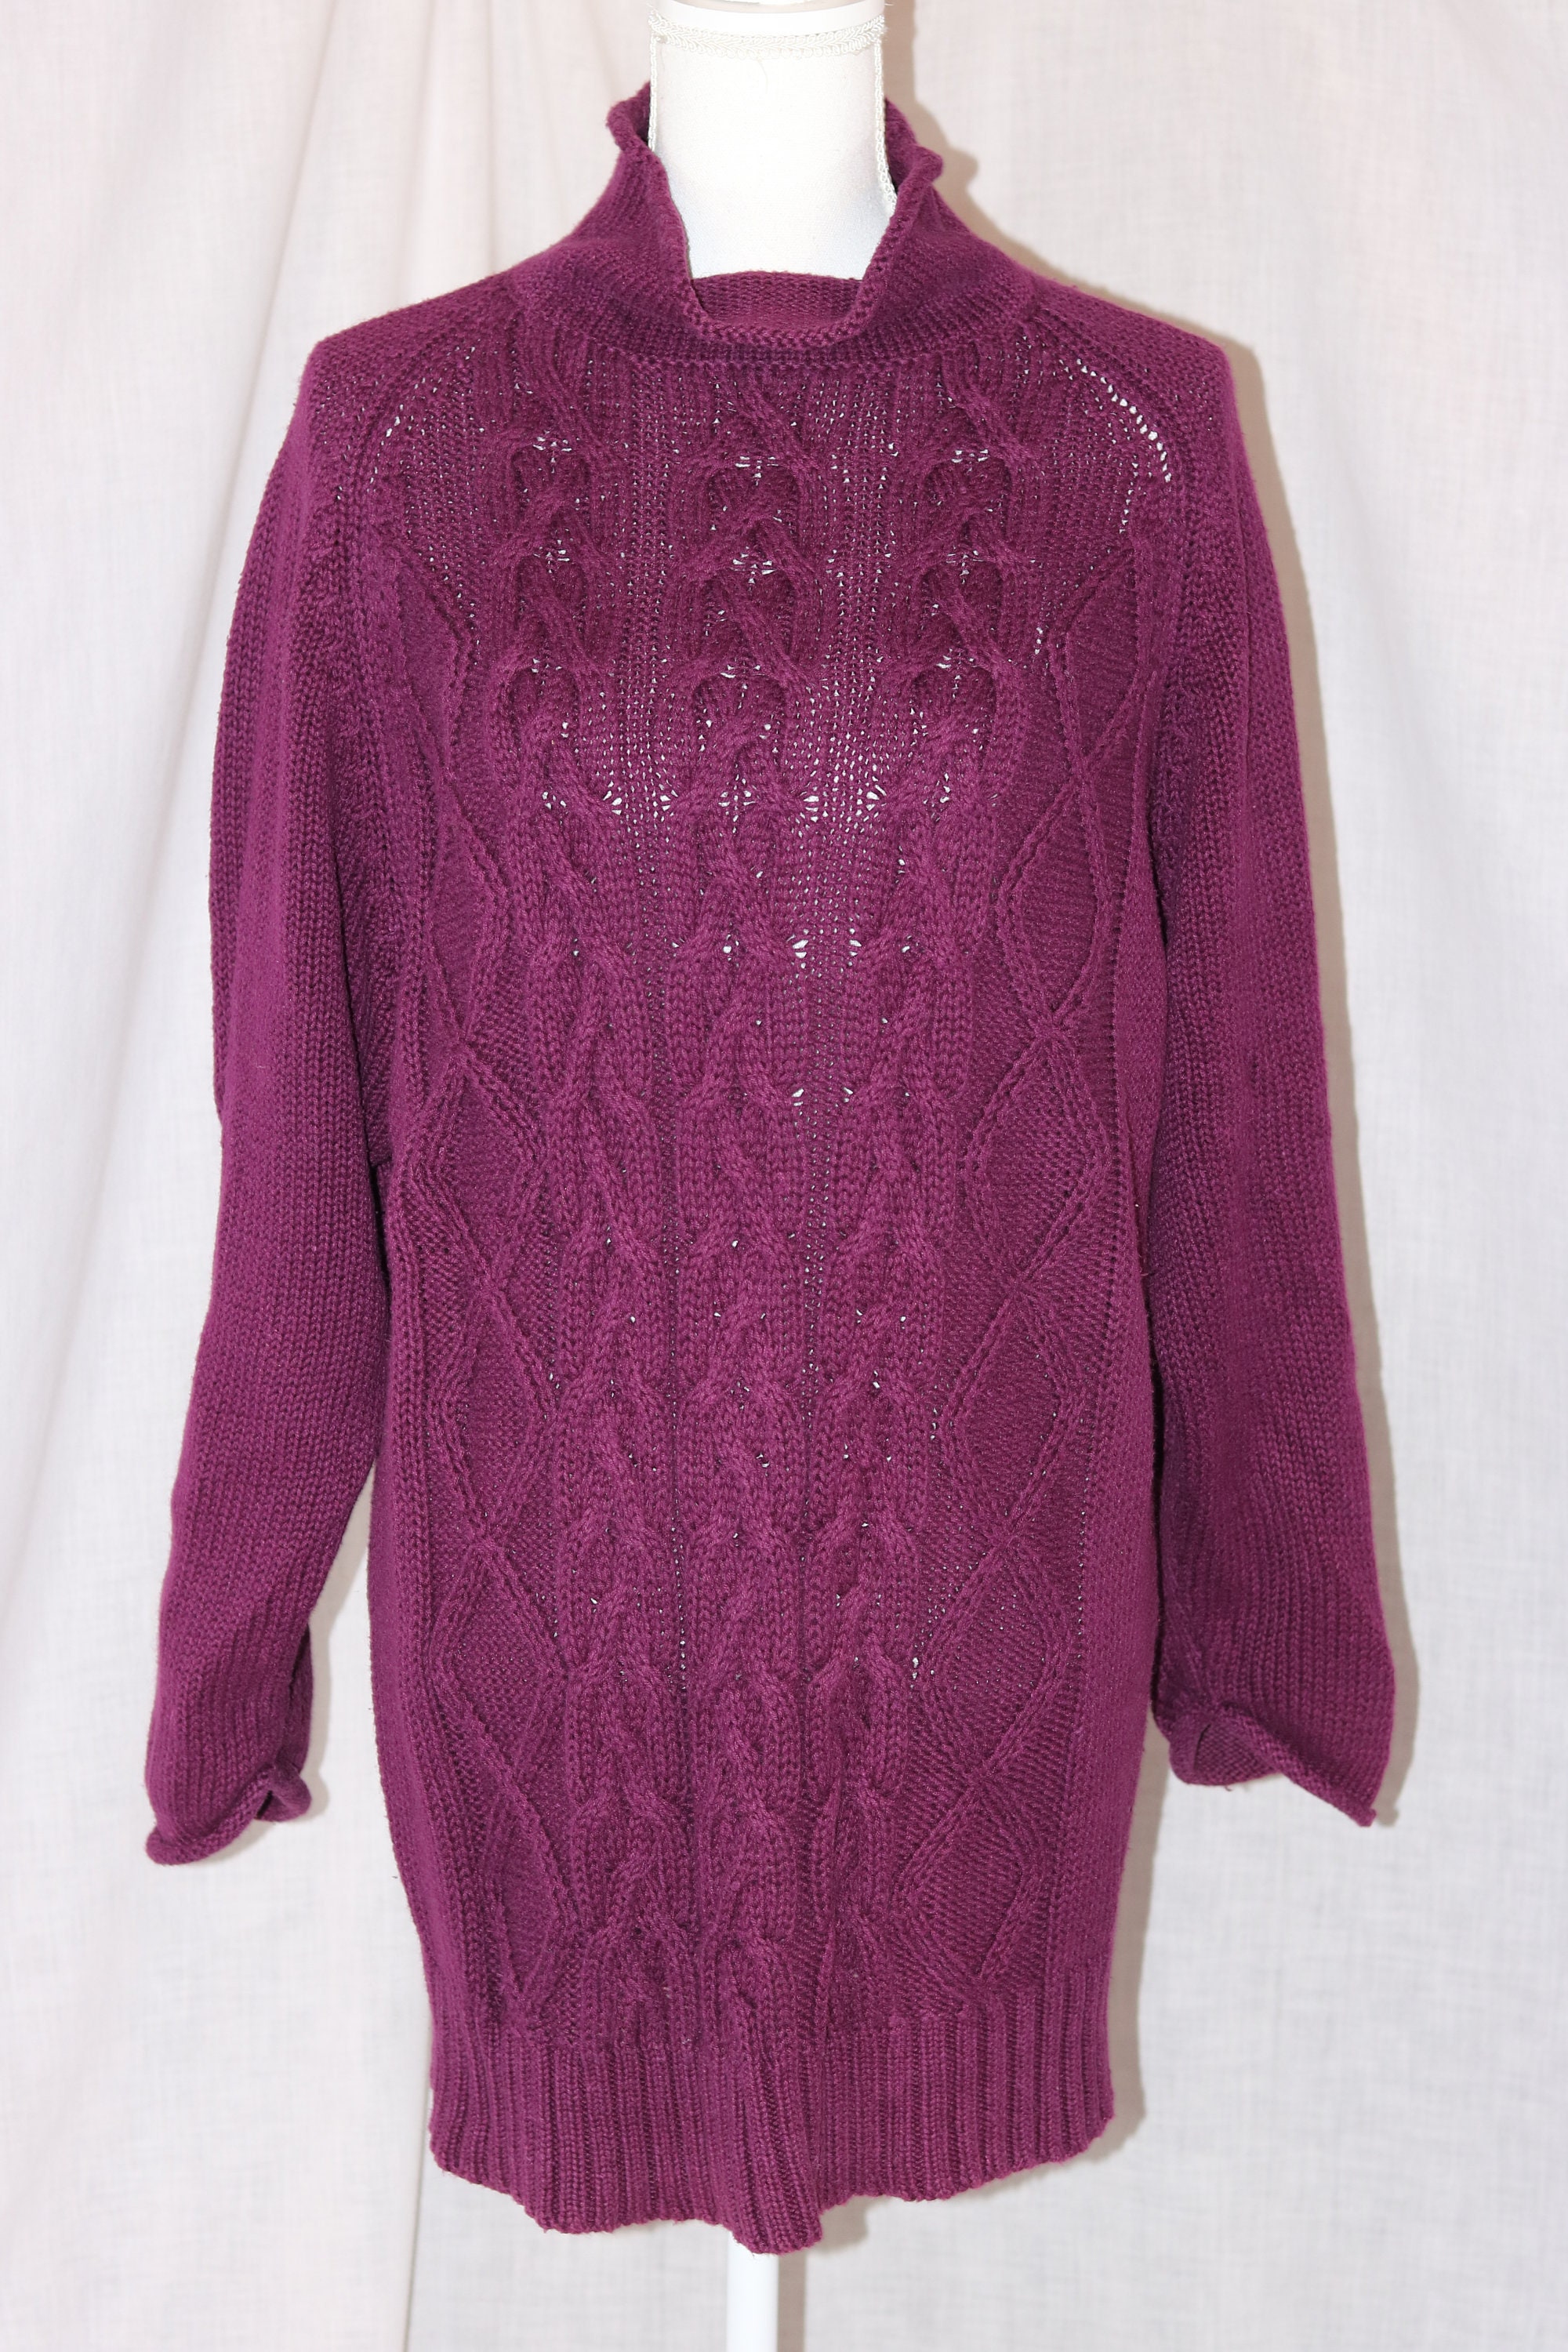 Vintage Forenza Purple Ramie Blend Long Sleeve Cable Knit Sweater Size Large